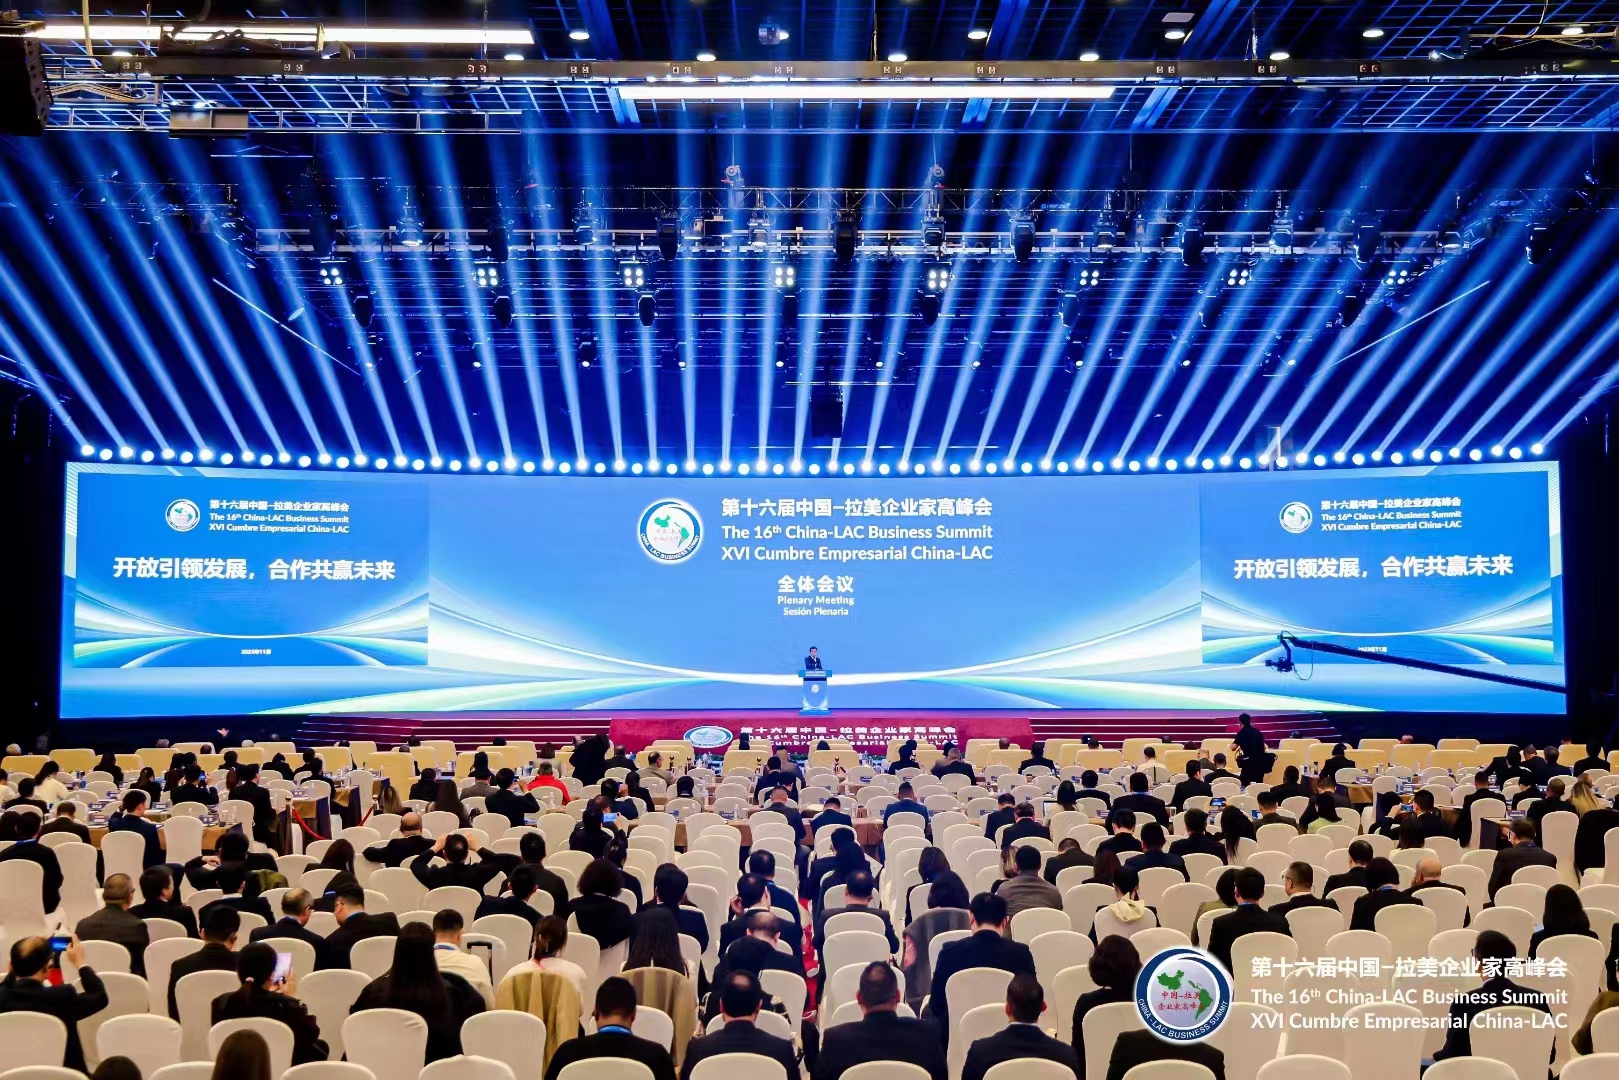 RECAP: The 16th China-LAC Business Summit